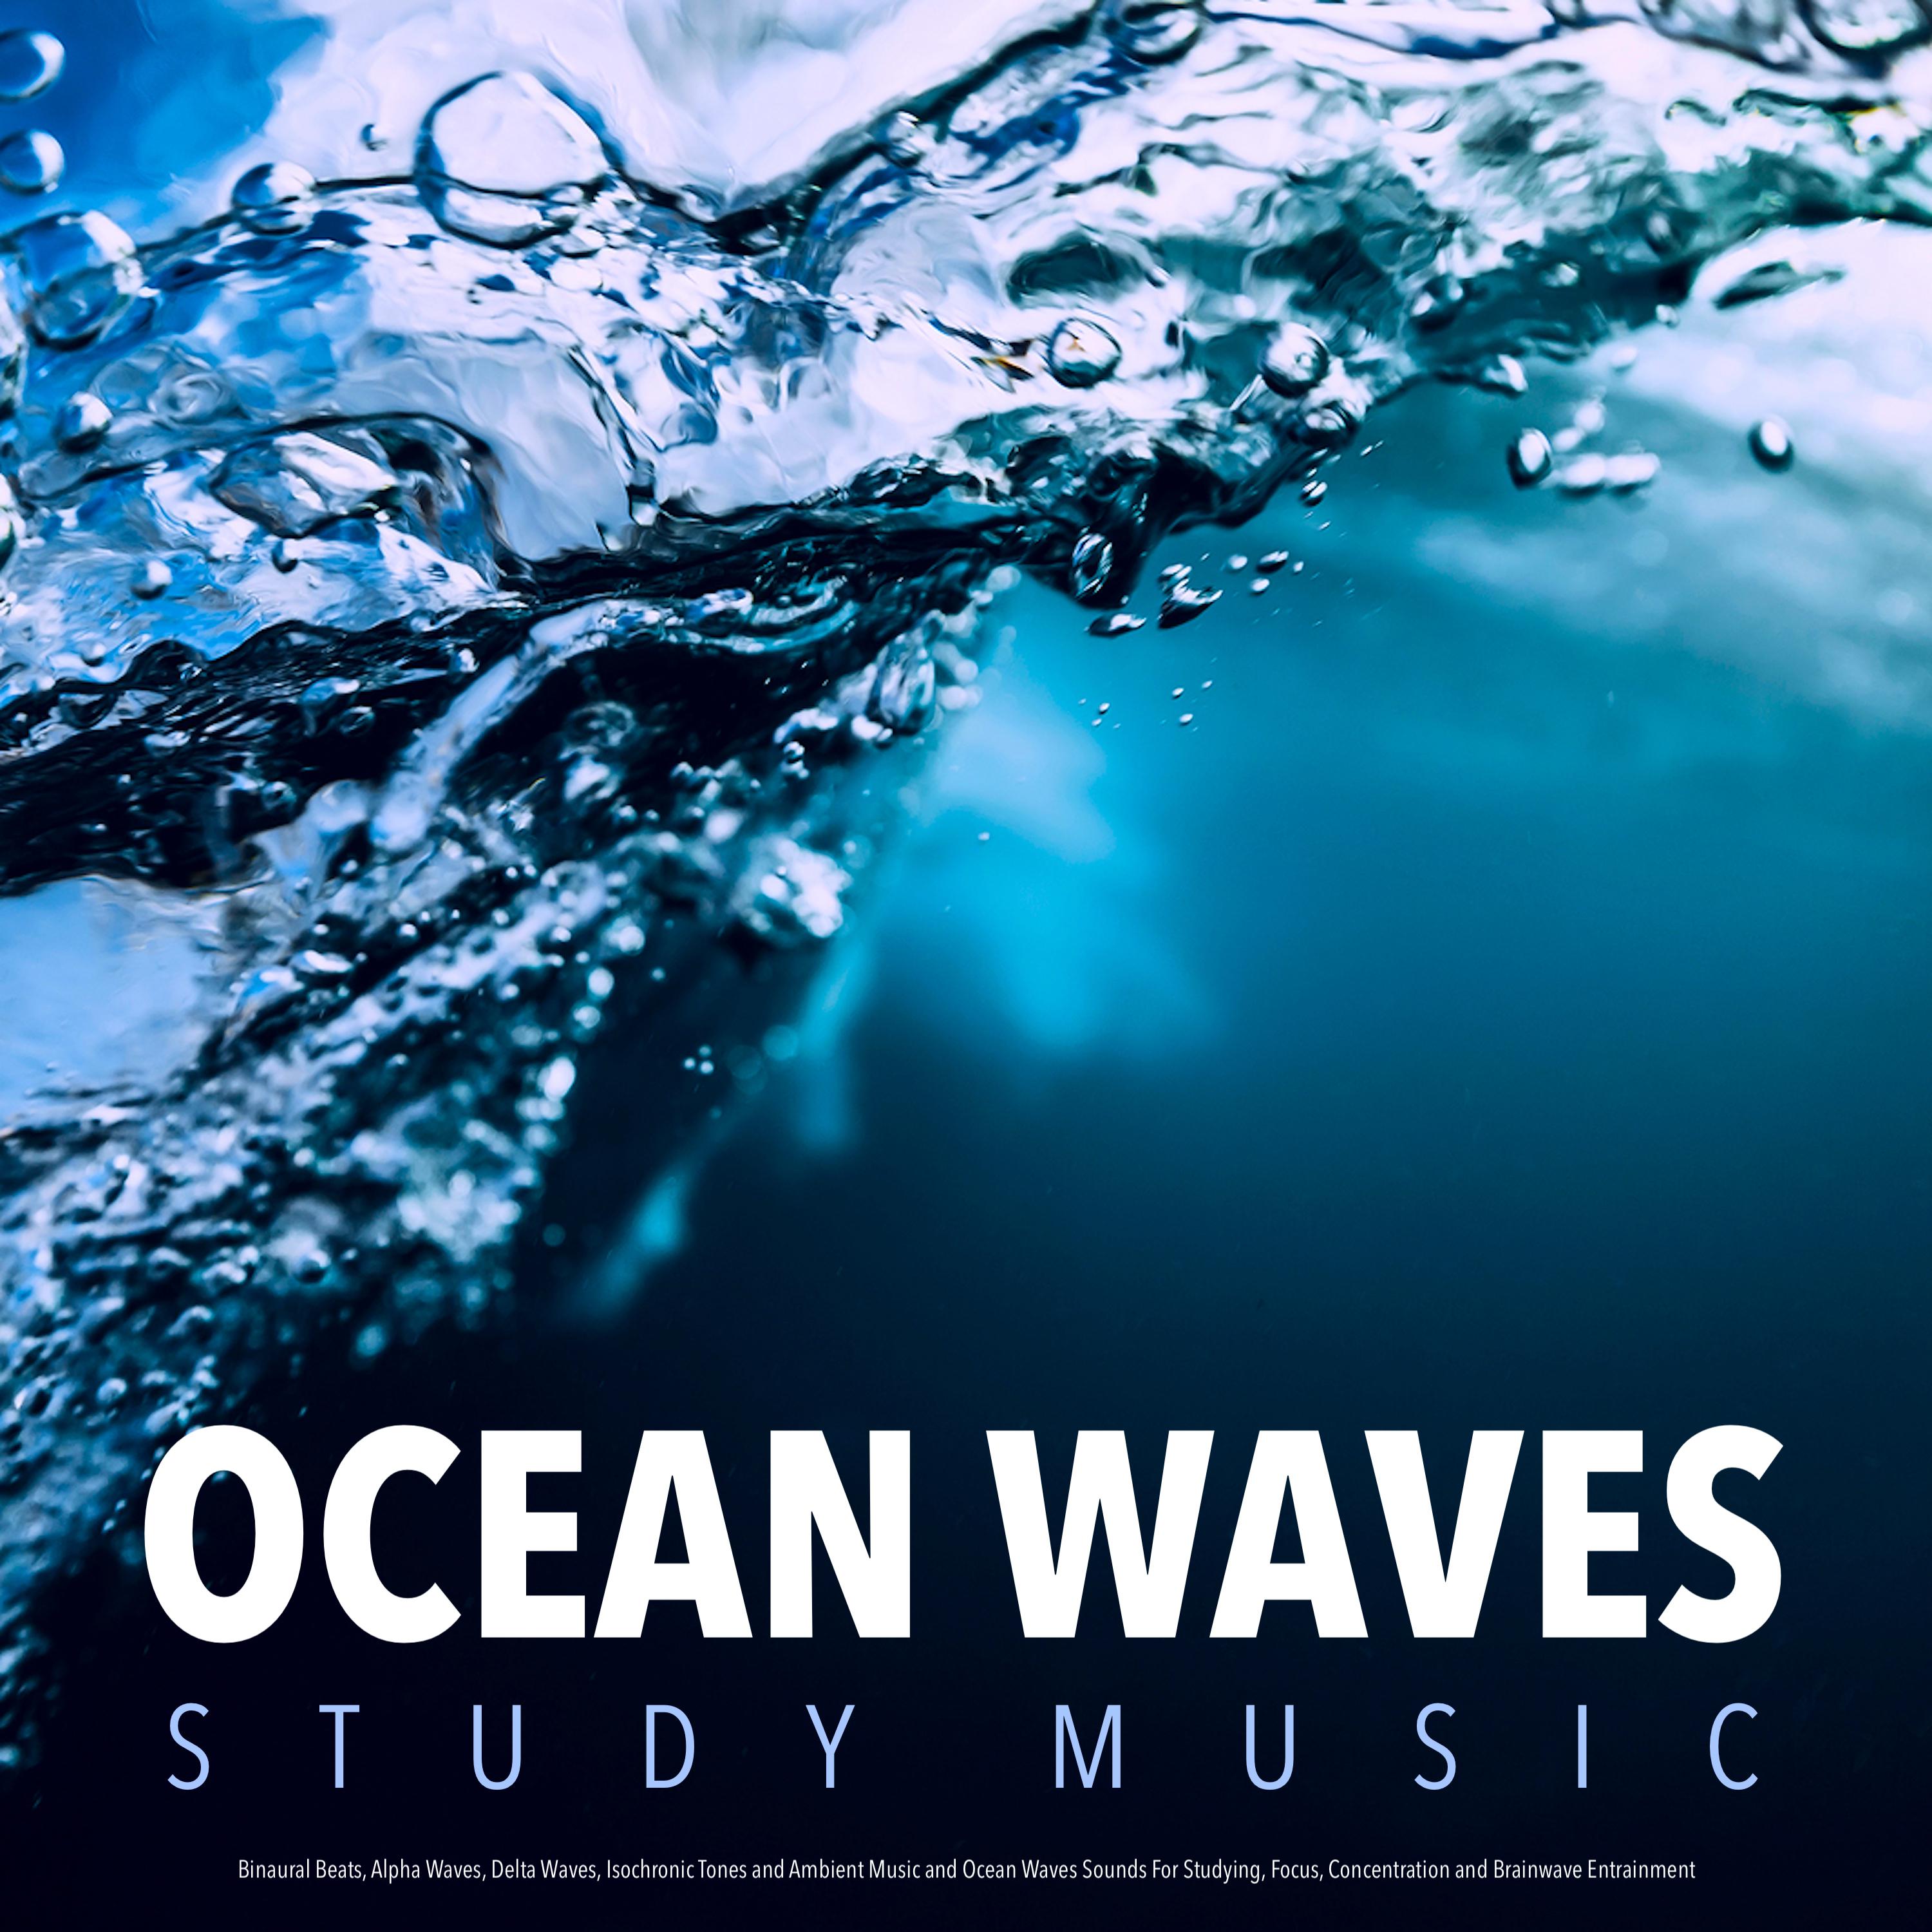 Studying Music with Calm Ocean Waves